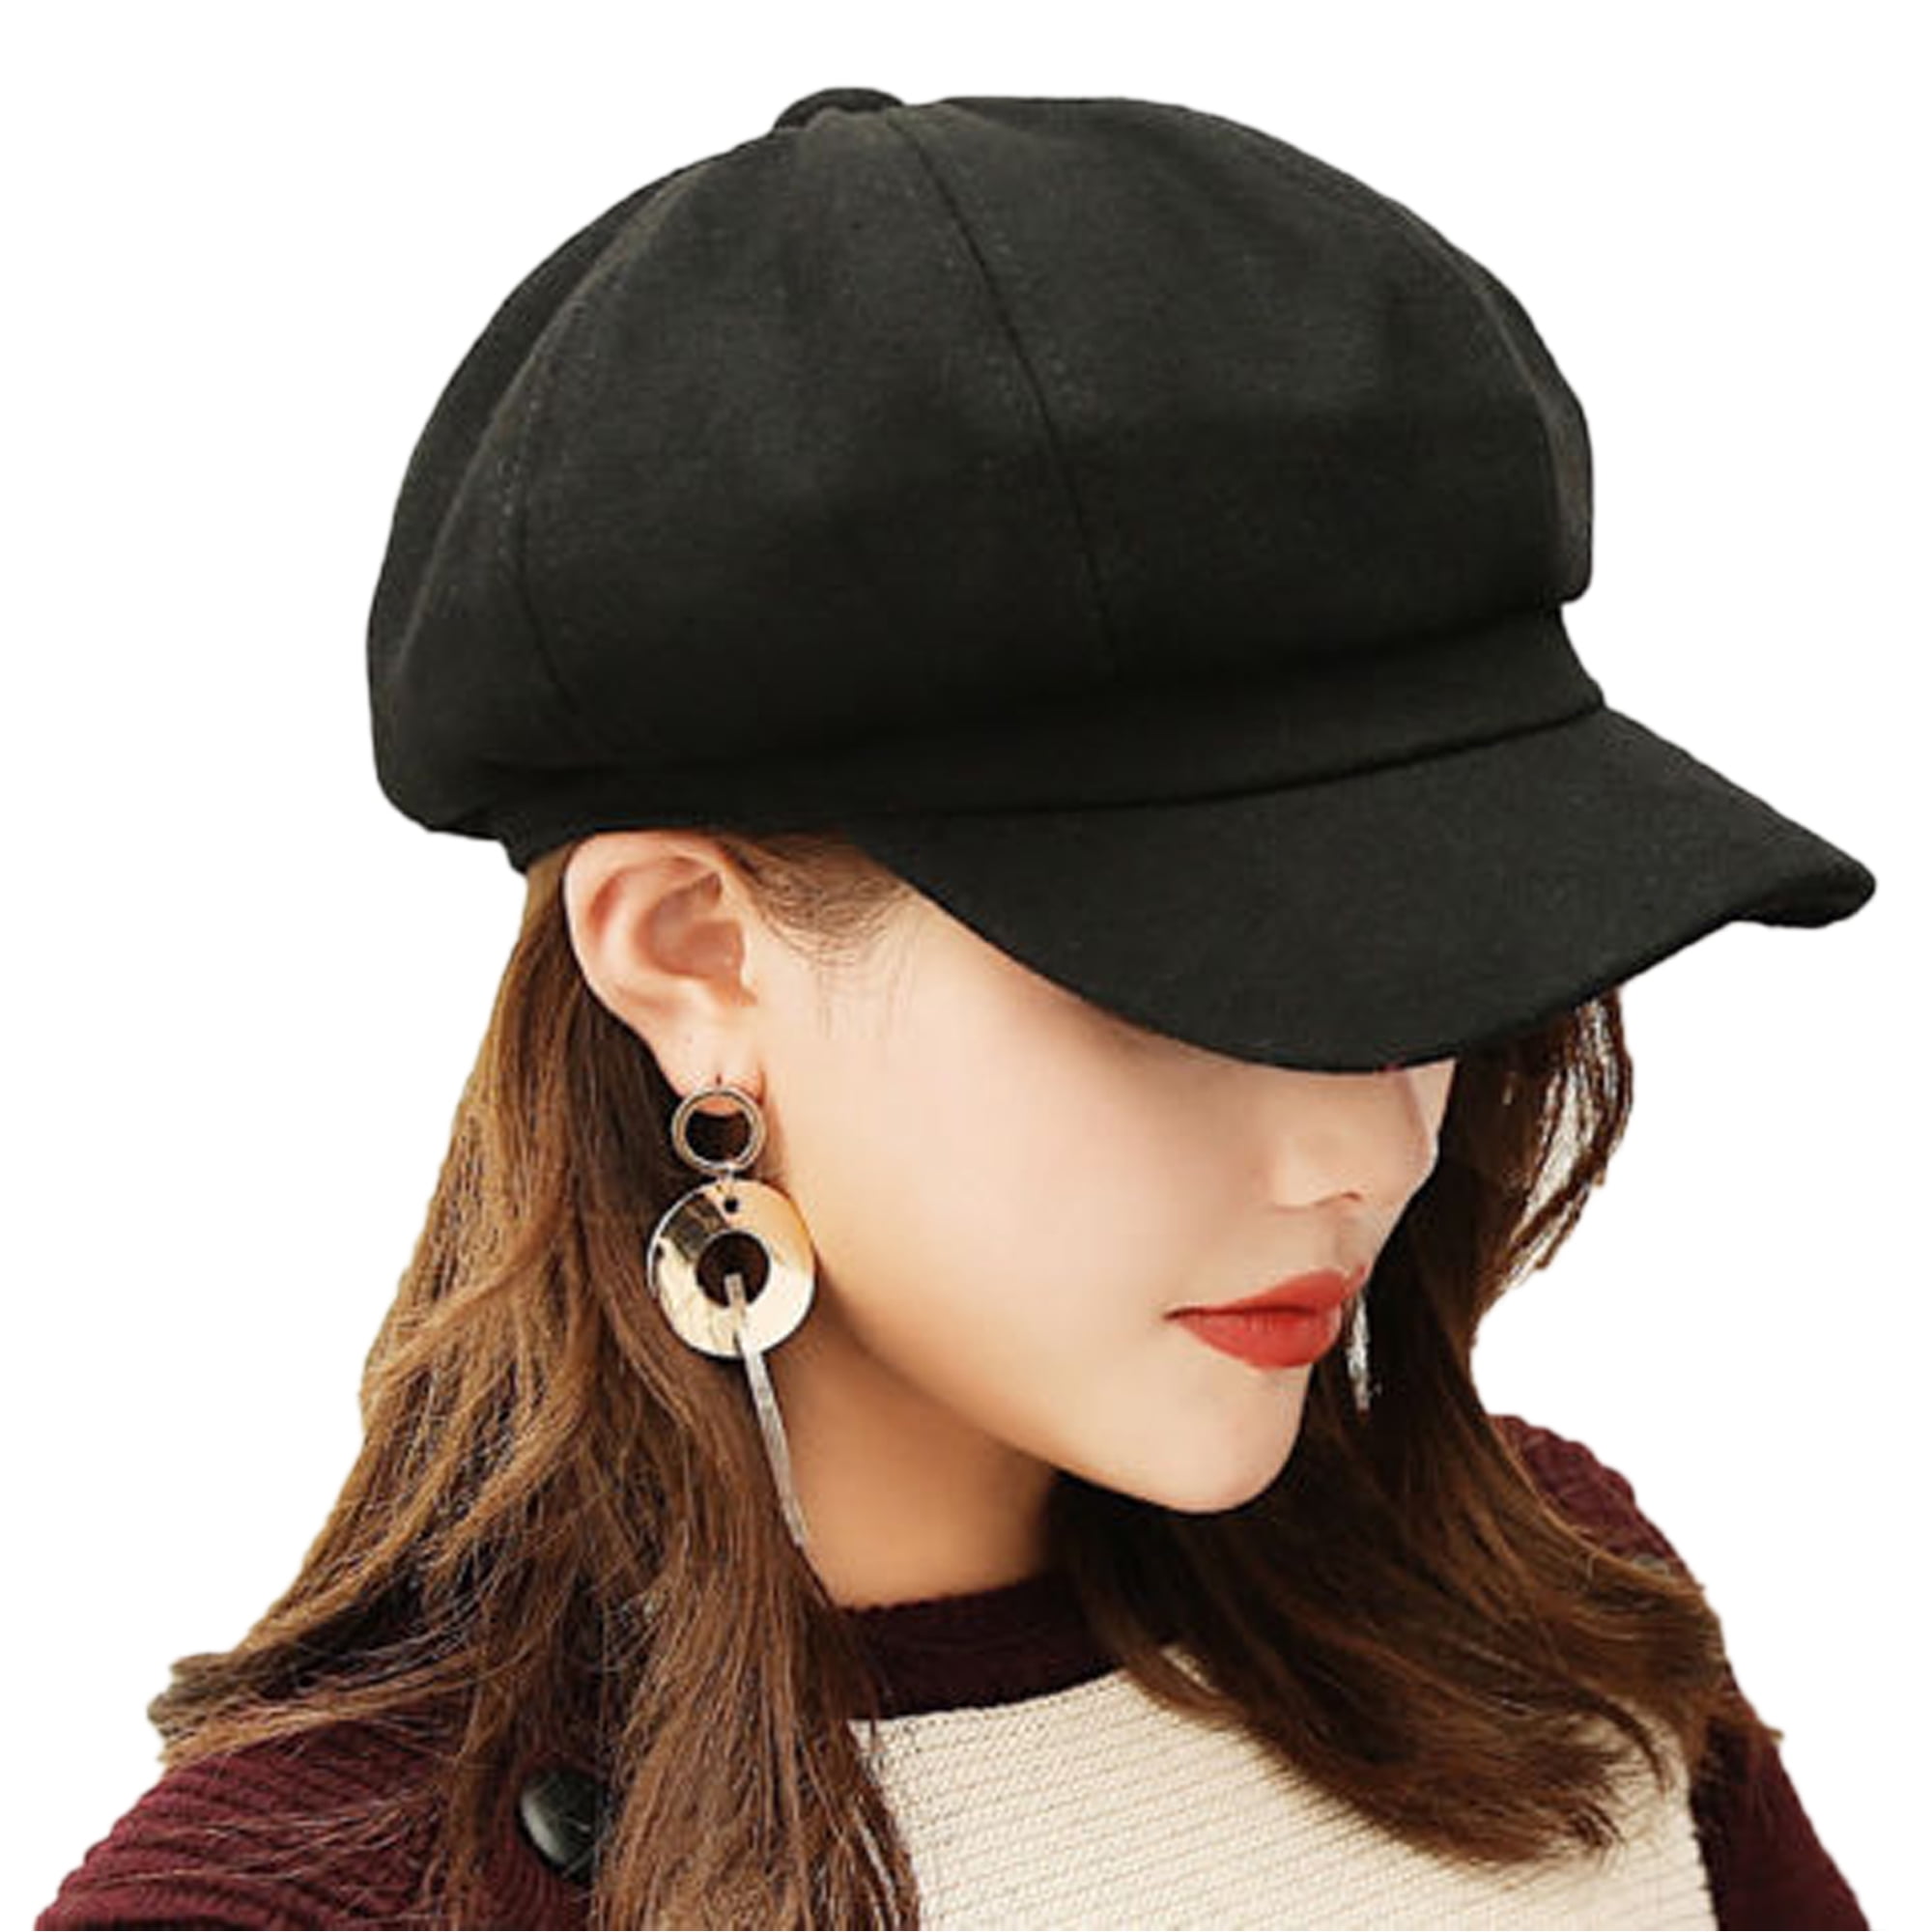 Suede Plain Color Newsboy Cap for Women Adjusted Thick Paperboy Hat Ladies Pleated Warm Octagonal Hats